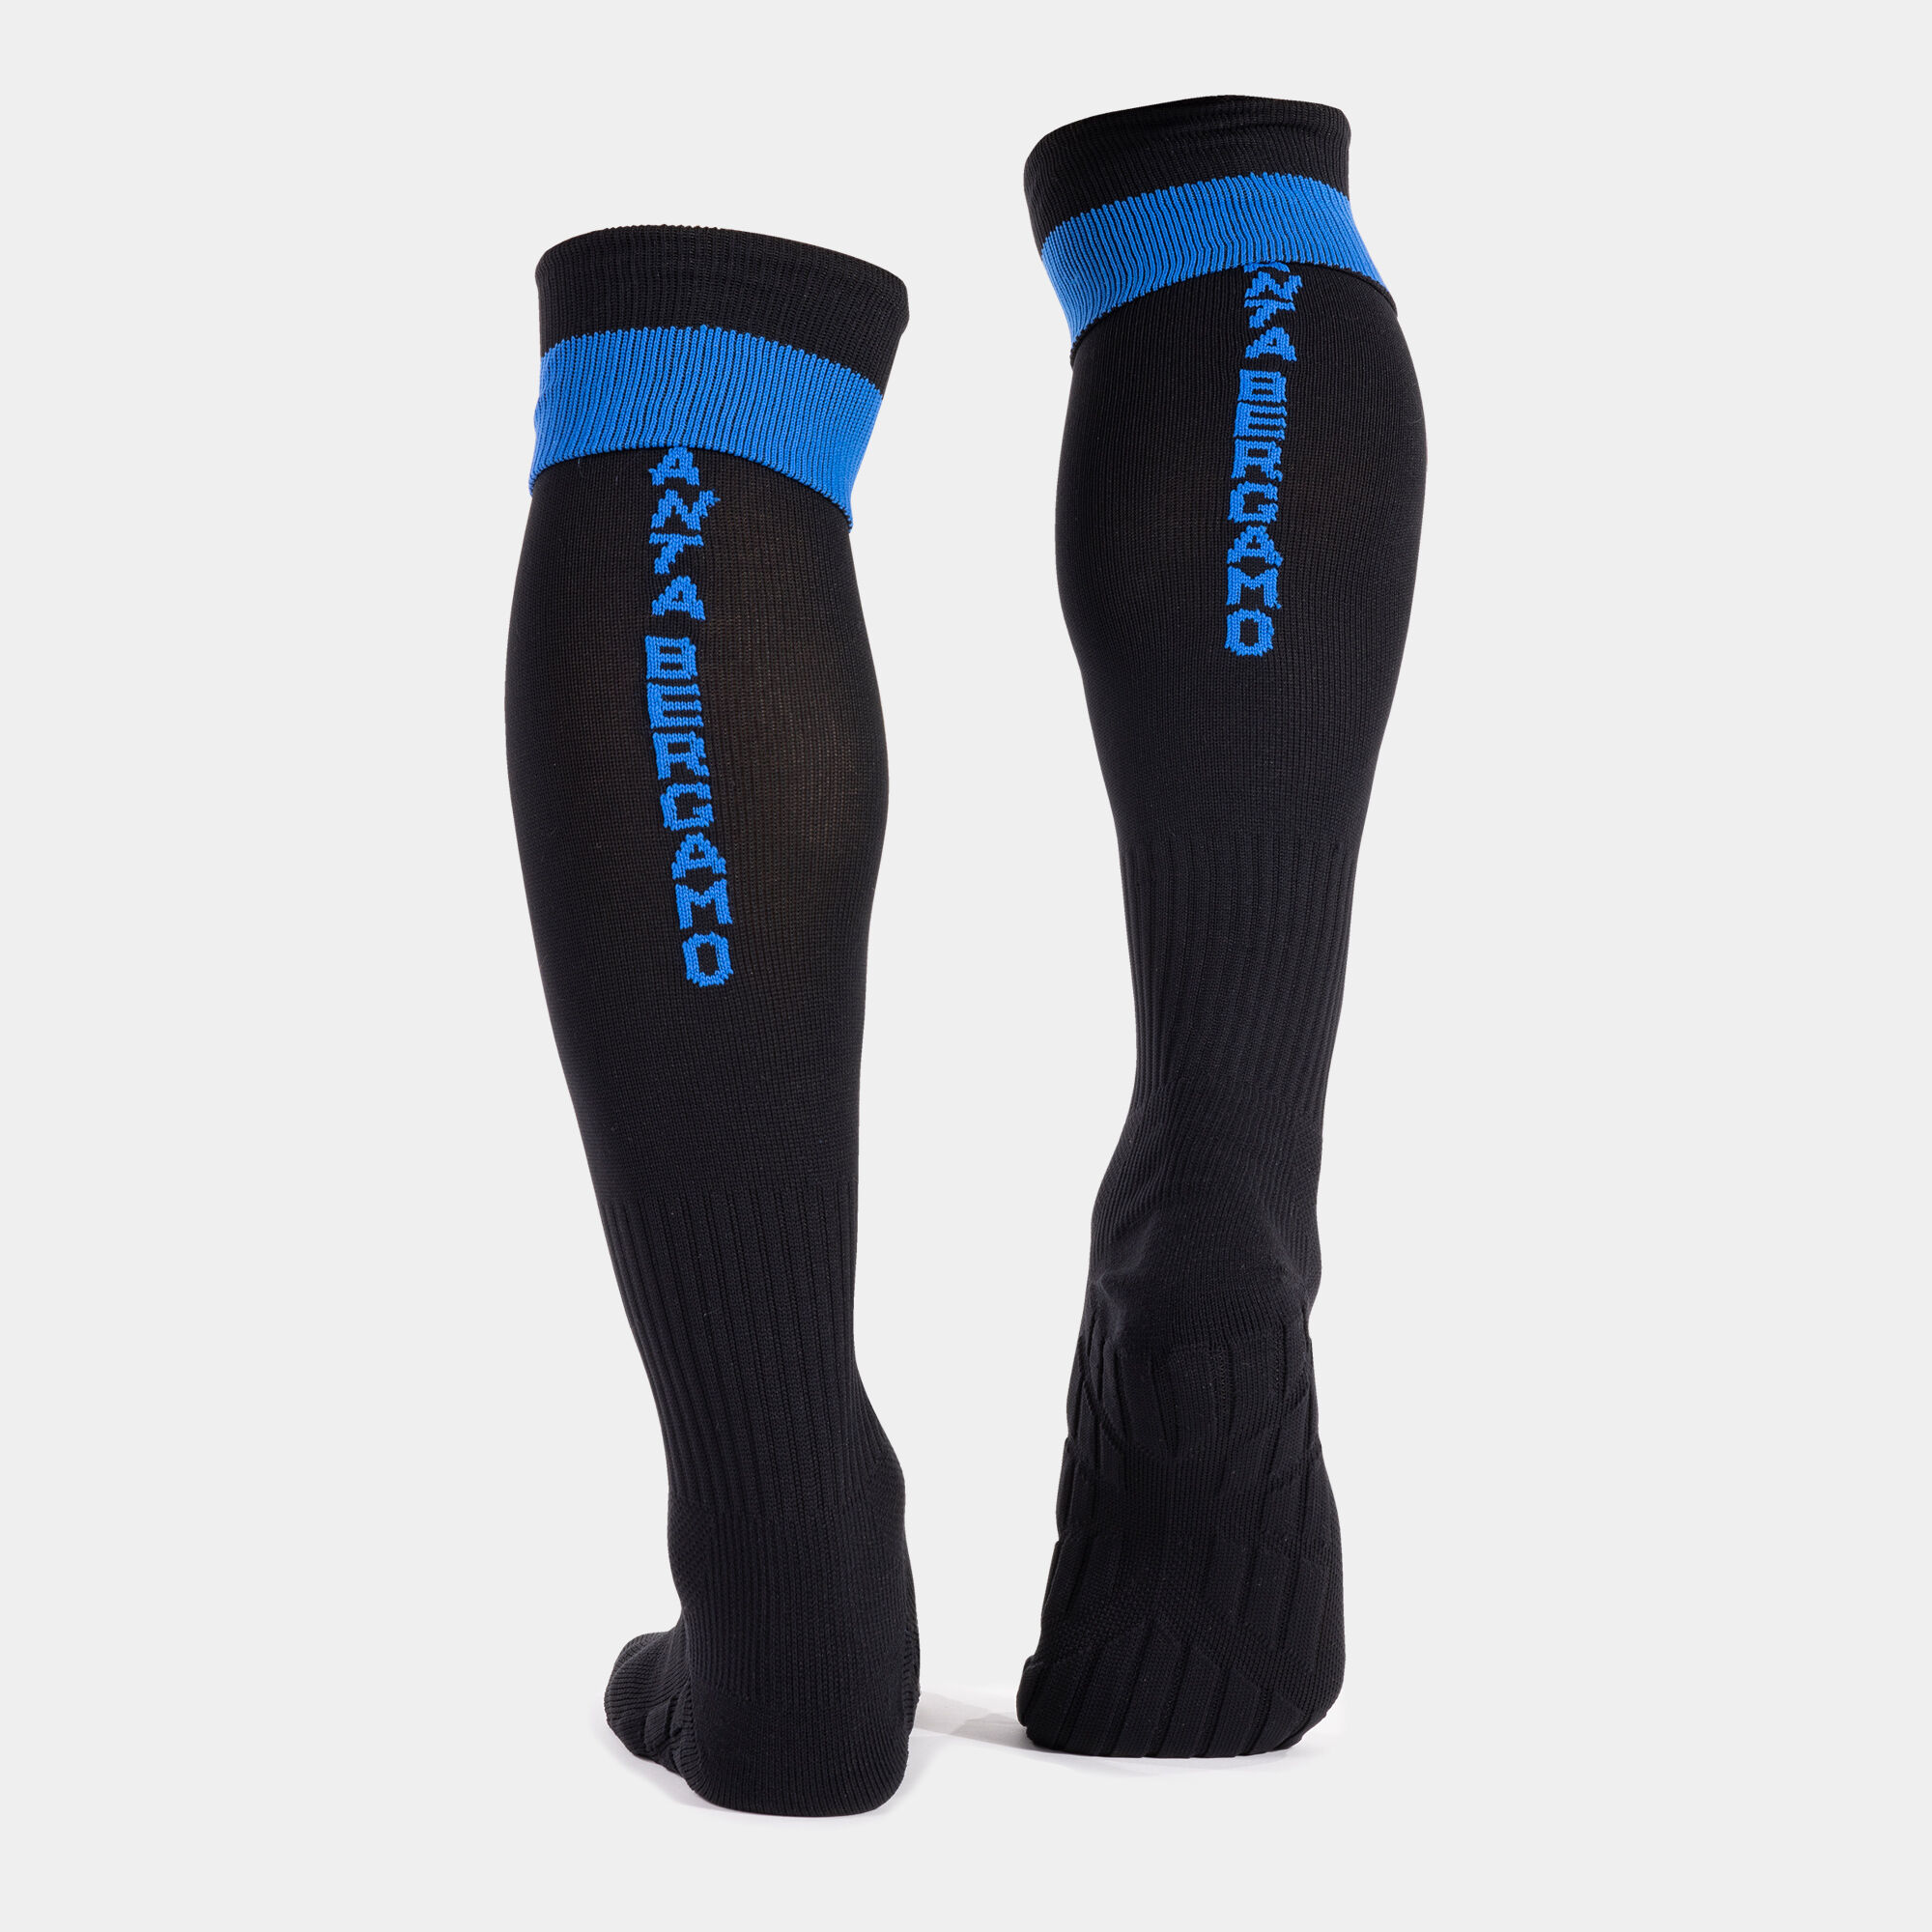 Pack-2 calcetines deportivos cortos mujer anti-roce Ref.1719T Joma